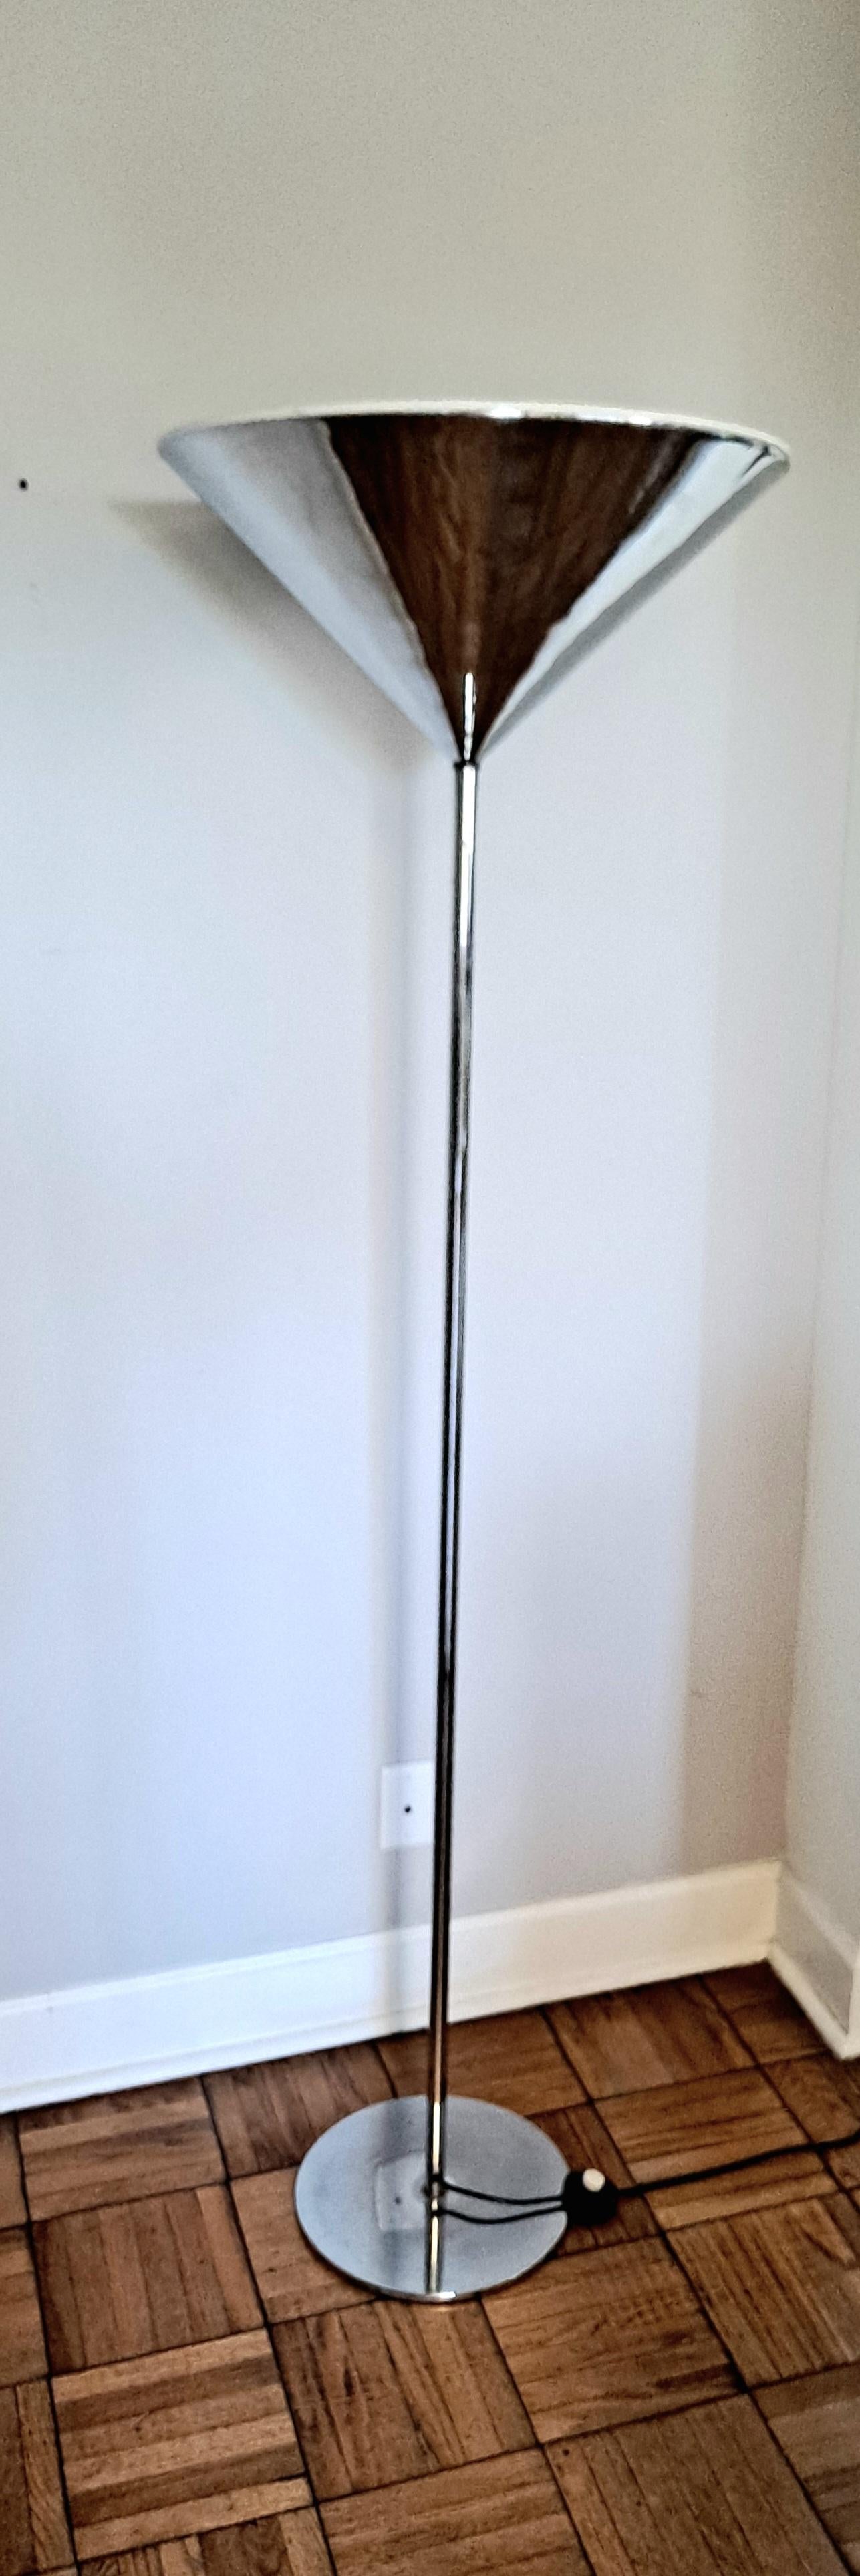 Italian Mid Century  Torchiere Chrome Floor Lamp  In Good Condition For Sale In Los Angeles, CA